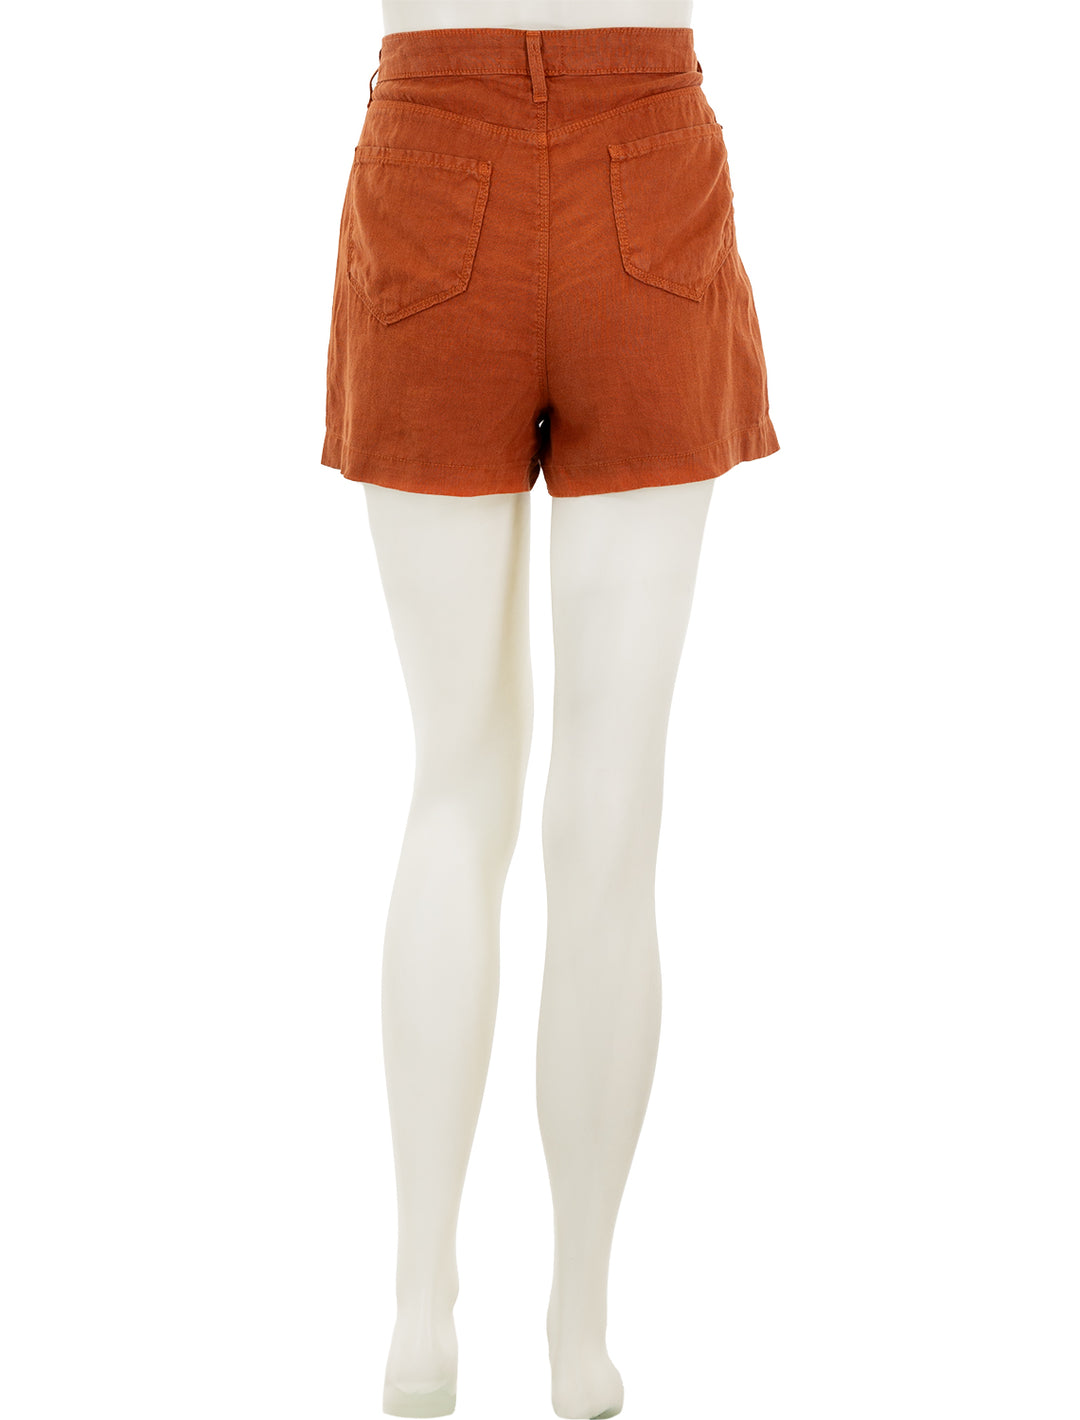 Back view of L'agence's gina shorts in sienna.